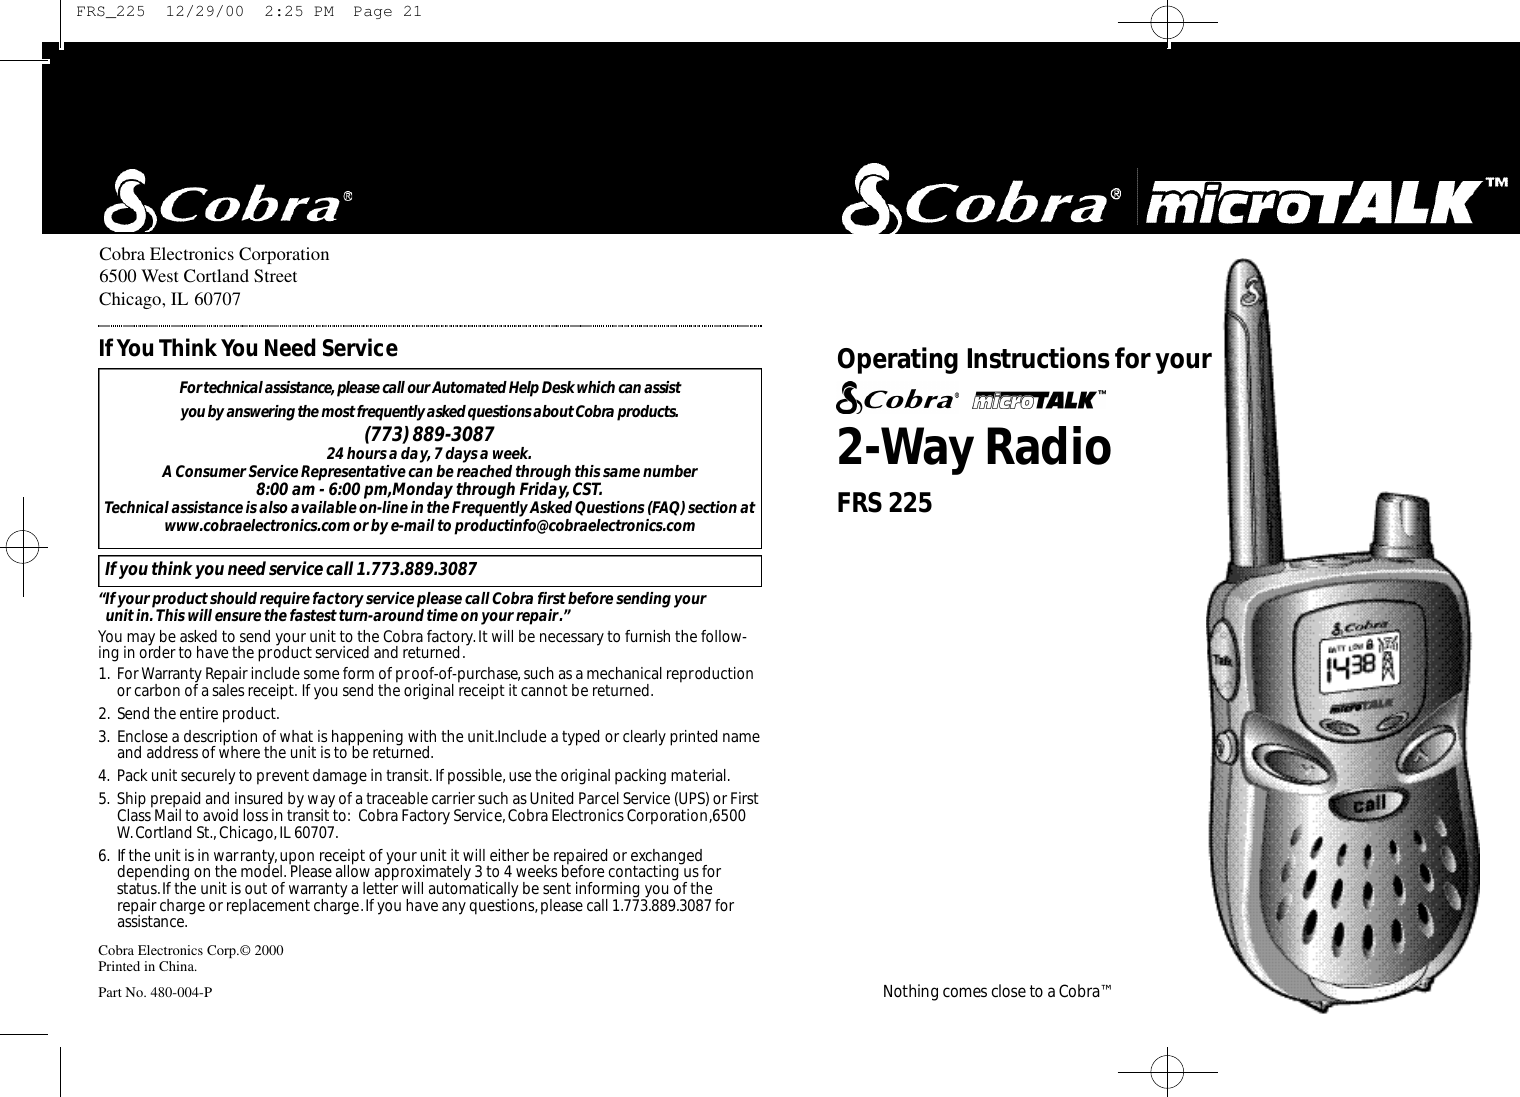 2-Way RadioO pe rating Instru ctions for your Nothing comes close to a Co b ra ™Cobra Electronics Corporation6500 West Cortland StreetChicago, IL 60707Cobra Electronics Corp.© 2000Printed in China.Part No. 480-004-PFor te c h n i c al assistance,please call our Au to m a ted Help Desk which can assist you by answering the most fre q u e n t l y asked questions about Co b ra prod u ct s .(773) 889-3087 24 hours a day,7 days a week.A Consumer Service Representative can be reached through this same number 8:00 am - 6:00 pm,Monday through Friday,CST.Technical assistance is also available on-line in the Frequently Asked Questions (FAQ) section atwww.cobraelectronics.com or by e-mail to productinfo@cobraelectronics.comIf you think you need service call 1.773.889.3087“If your product should require factory service please call Cobra first before sending your unit in. This will ensure the fastest turn-around time on your repair.”You may be asked to send your unit to the Cobra factory.It will be necessary to furnish the follow-ing in order to have the product serviced and returned.1. For Warranty Repair include some form of proof-of-purchase, such as a mechanical reproductionor carbon of a sales receipt. If you send the original receipt it cannot be returned.2. Send the entire product.3. Enclose a description of what is happening with the unit.Include a typed or clearly printed nameand address of where the unit is to be returned.4. Pack unit securely to prevent damage in transit. If possible, use the original packing material.5. Ship prepaid and insured by way of a traceable carrier such as United Parcel Service (UPS) or FirstClass Mail to avoid loss in transit to: Cobra Factory Service,Cobra Electronics Corporation,6500W. Cortland St., Chicago,IL 60707.6. If the unit is in warranty,upon receipt of your unit it will either be repaired or exchangeddepending on the model. Please allow approximately 3 to 4 weeks before contacting us for status.If the unit is out of warranty a letter will automatically be sent informing you of the repair charge or replacement charge.If you have any questions,please call 1.773.889.3087 forassistance.If You Think You Need ServiceFRS 225 FRS_225  12/29/00  2:25 PM  Page 21